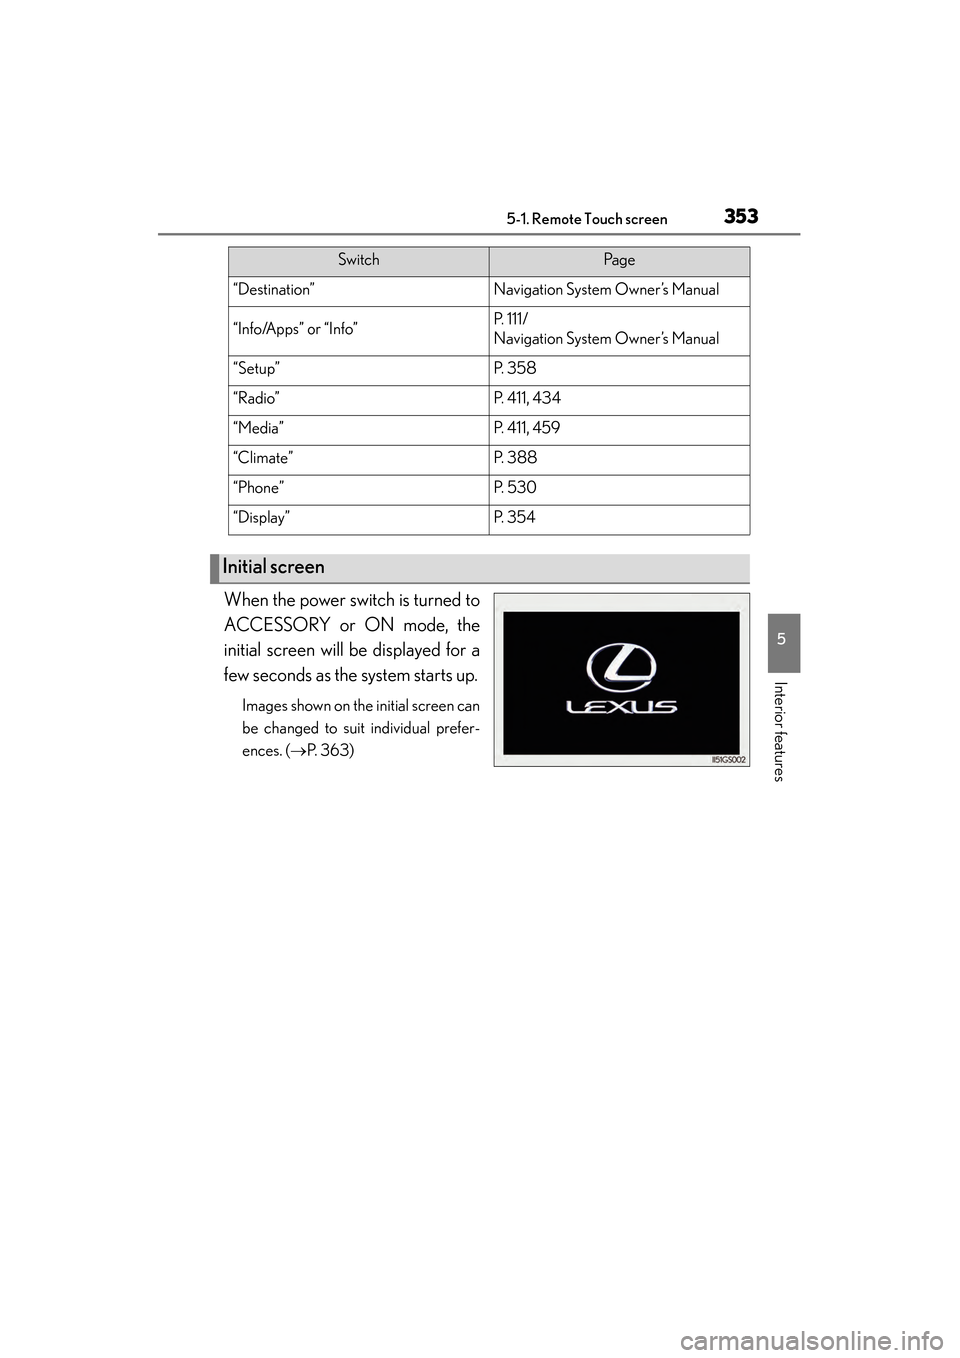 Lexus GS450h 2014  Owners Manual GS450h_OM_OM30D52U_(U)
3535-1. Remote Touch screen
5
Interior features
When the power switch is turned to
ACCESSORY or ON mode, the
initial screen will be displayed for a
few seconds as the system sta